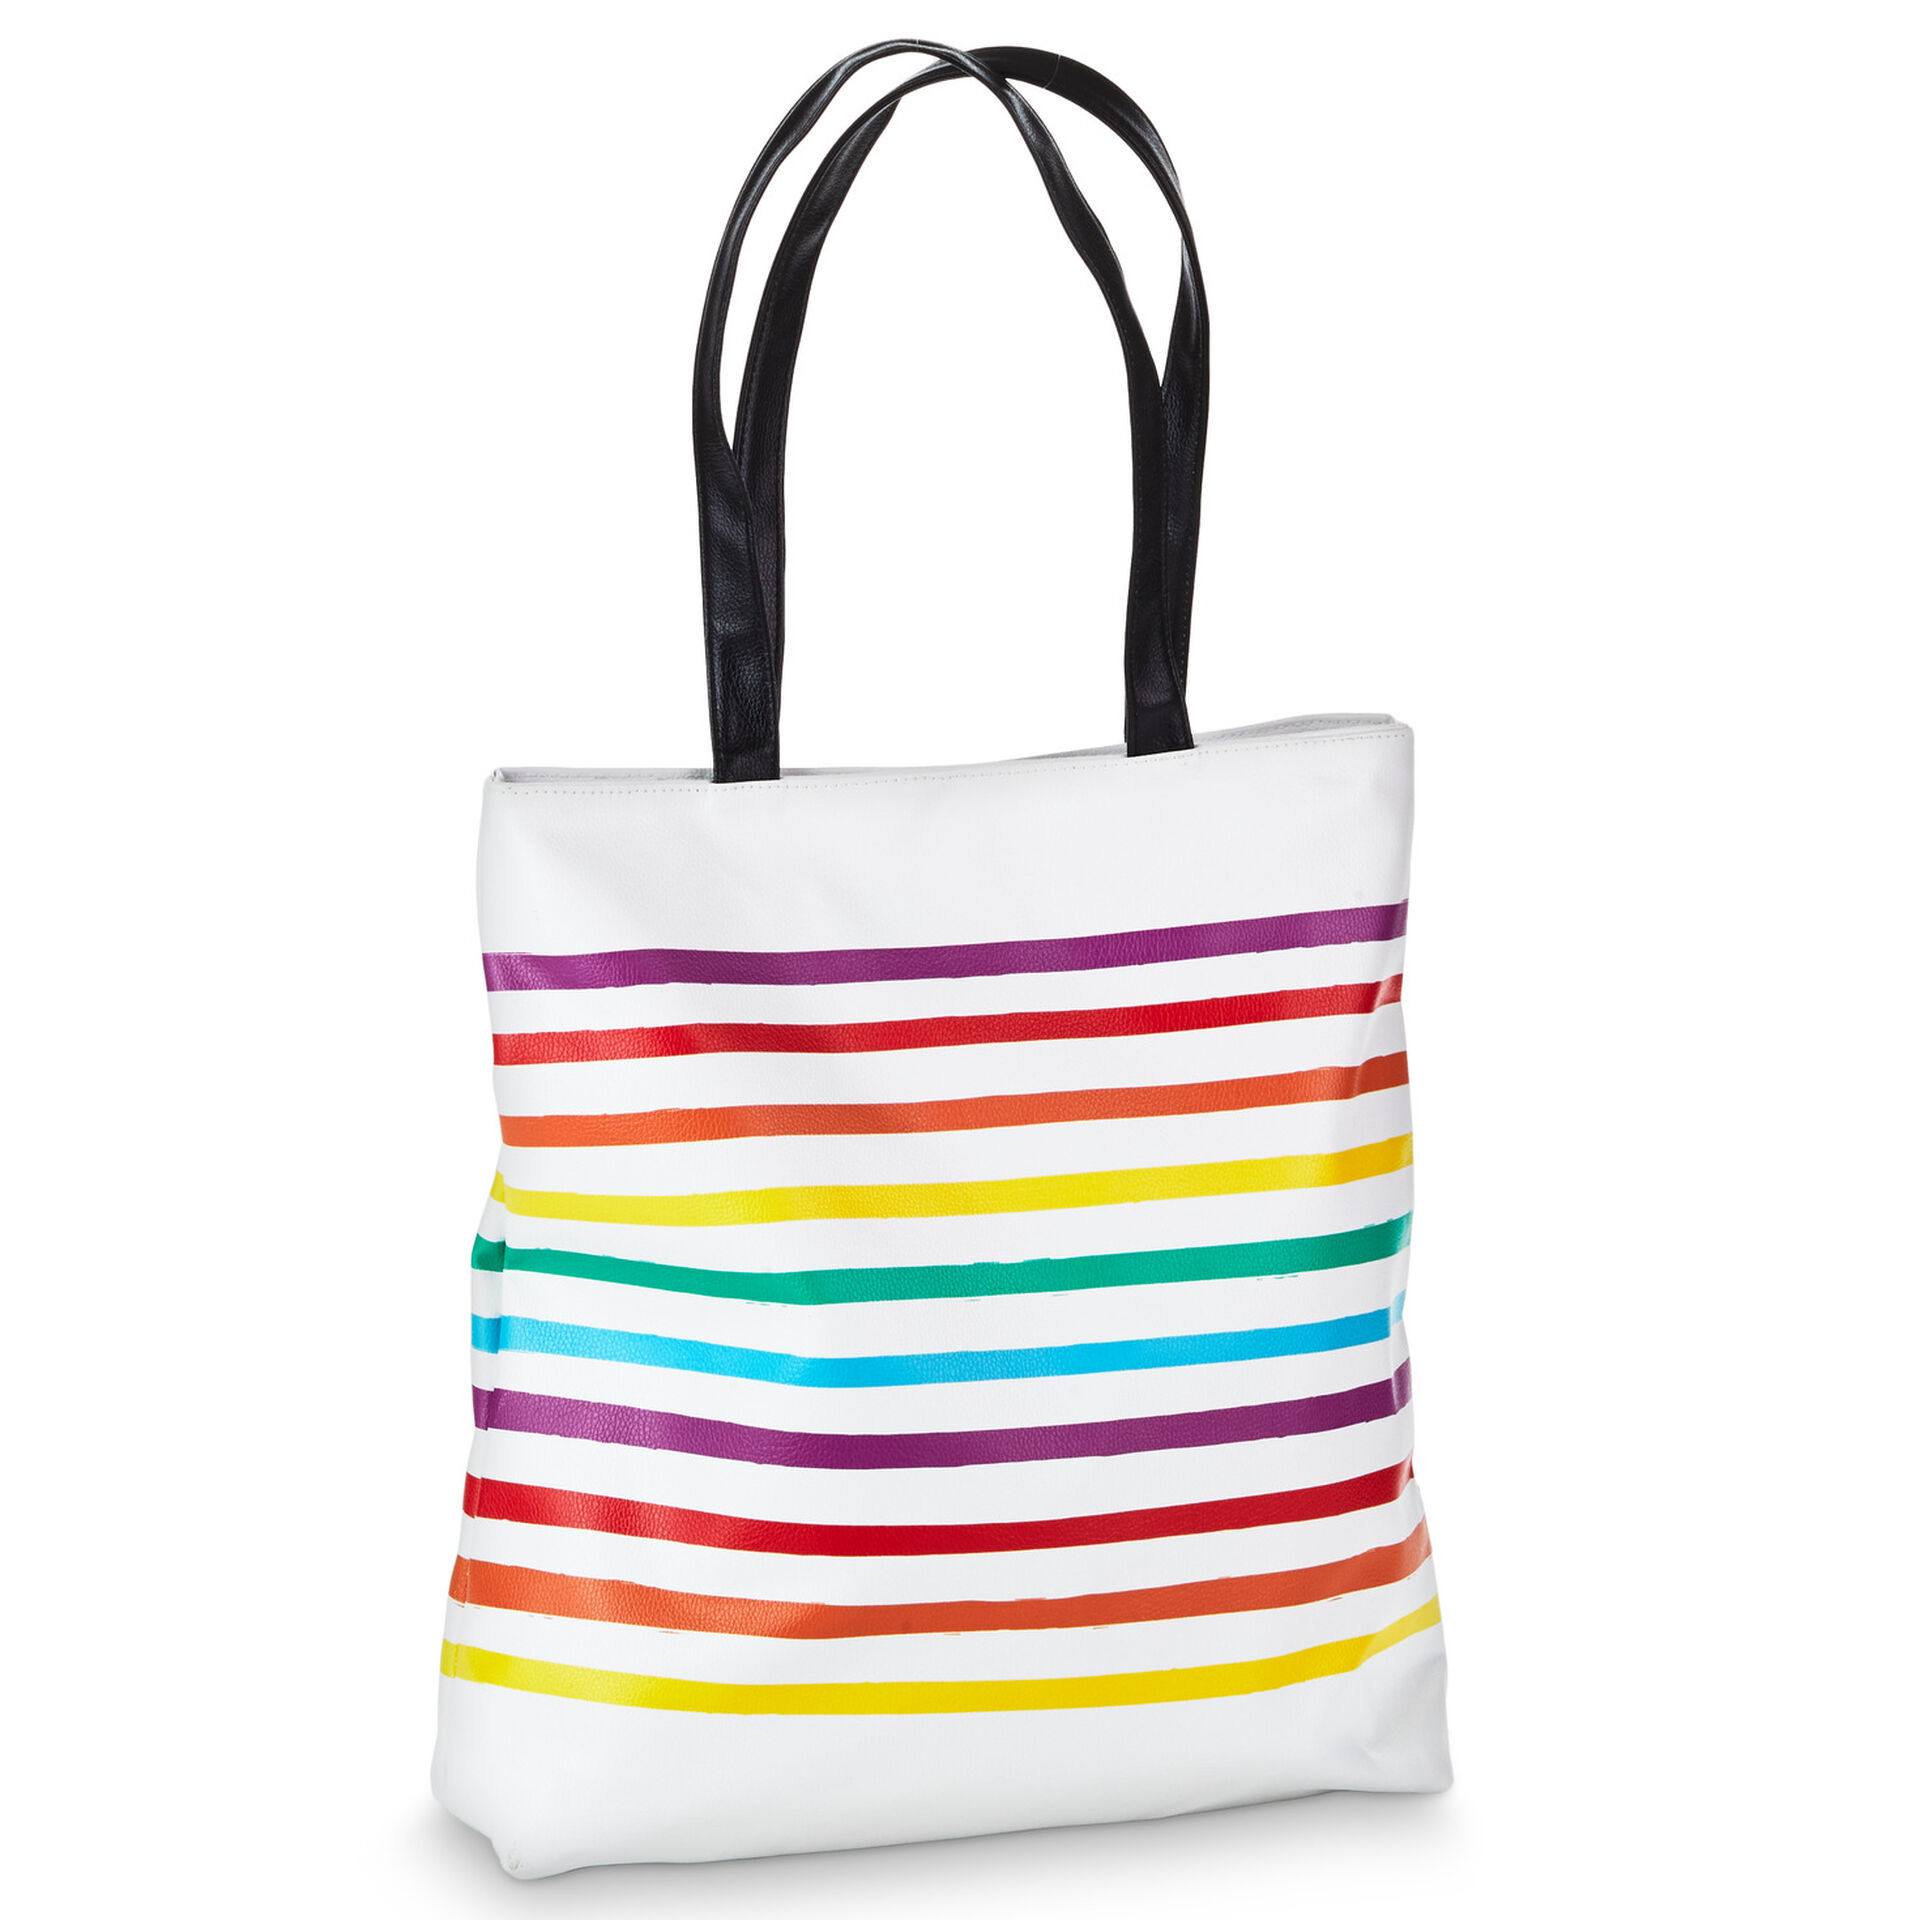 My Daily Women Tote Shoulder Bag Spiral Rainbow Stripes With Stars Handbag Large 